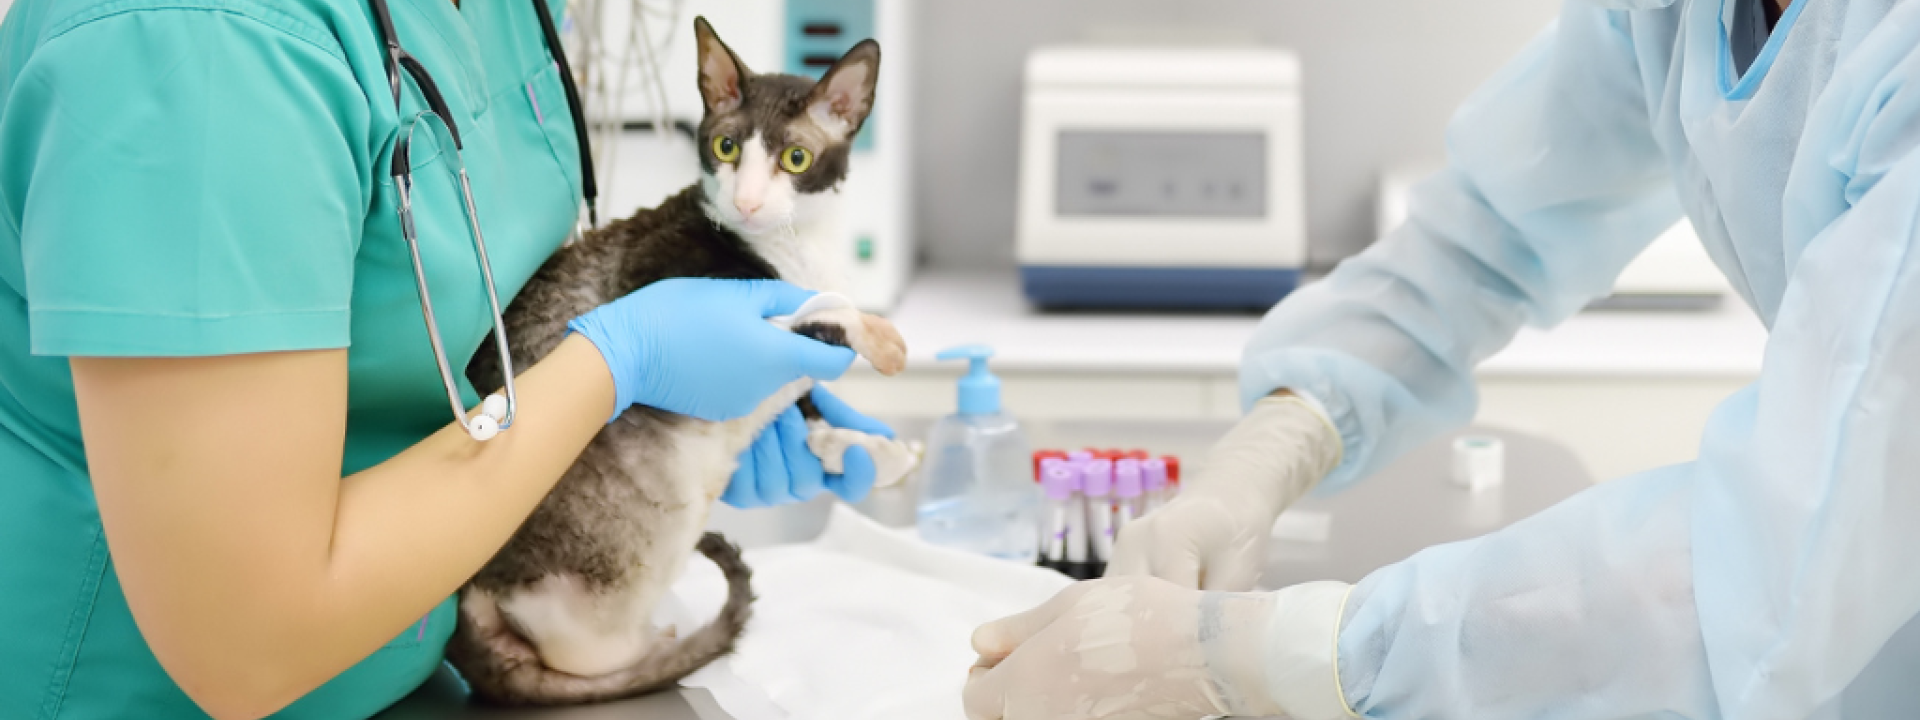 Cat being held for bloodwork